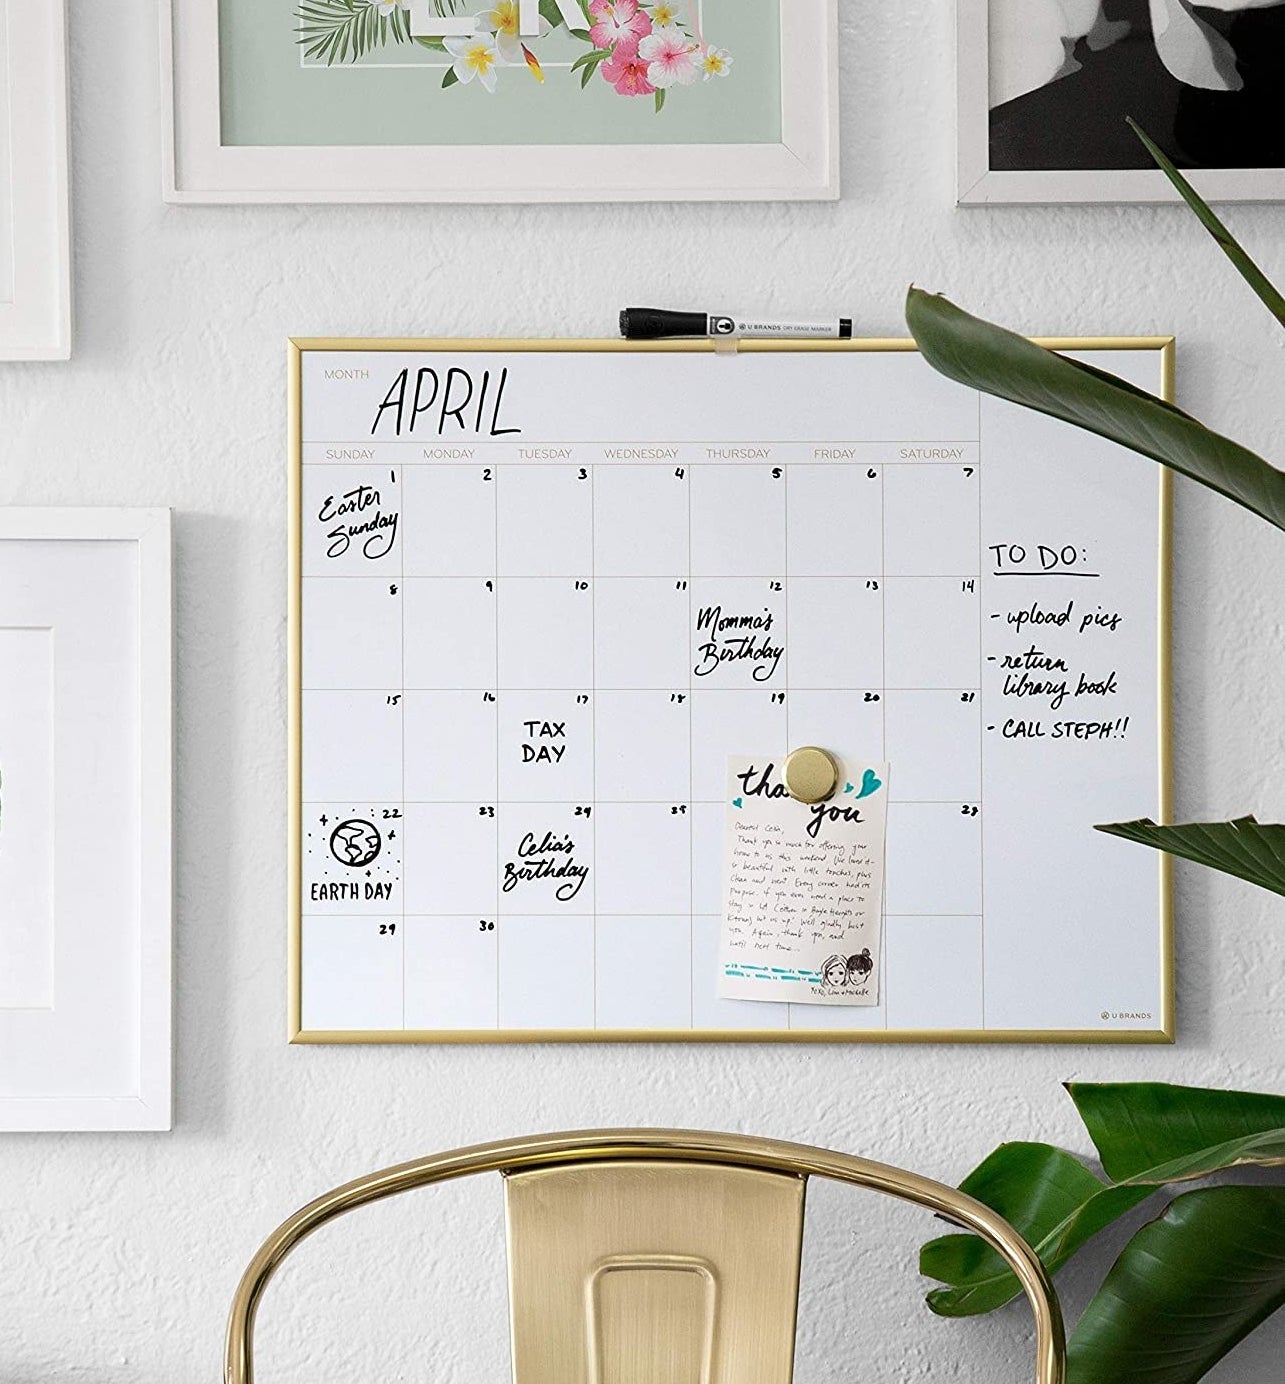 a gold rimmed dry erase calendar on a wall